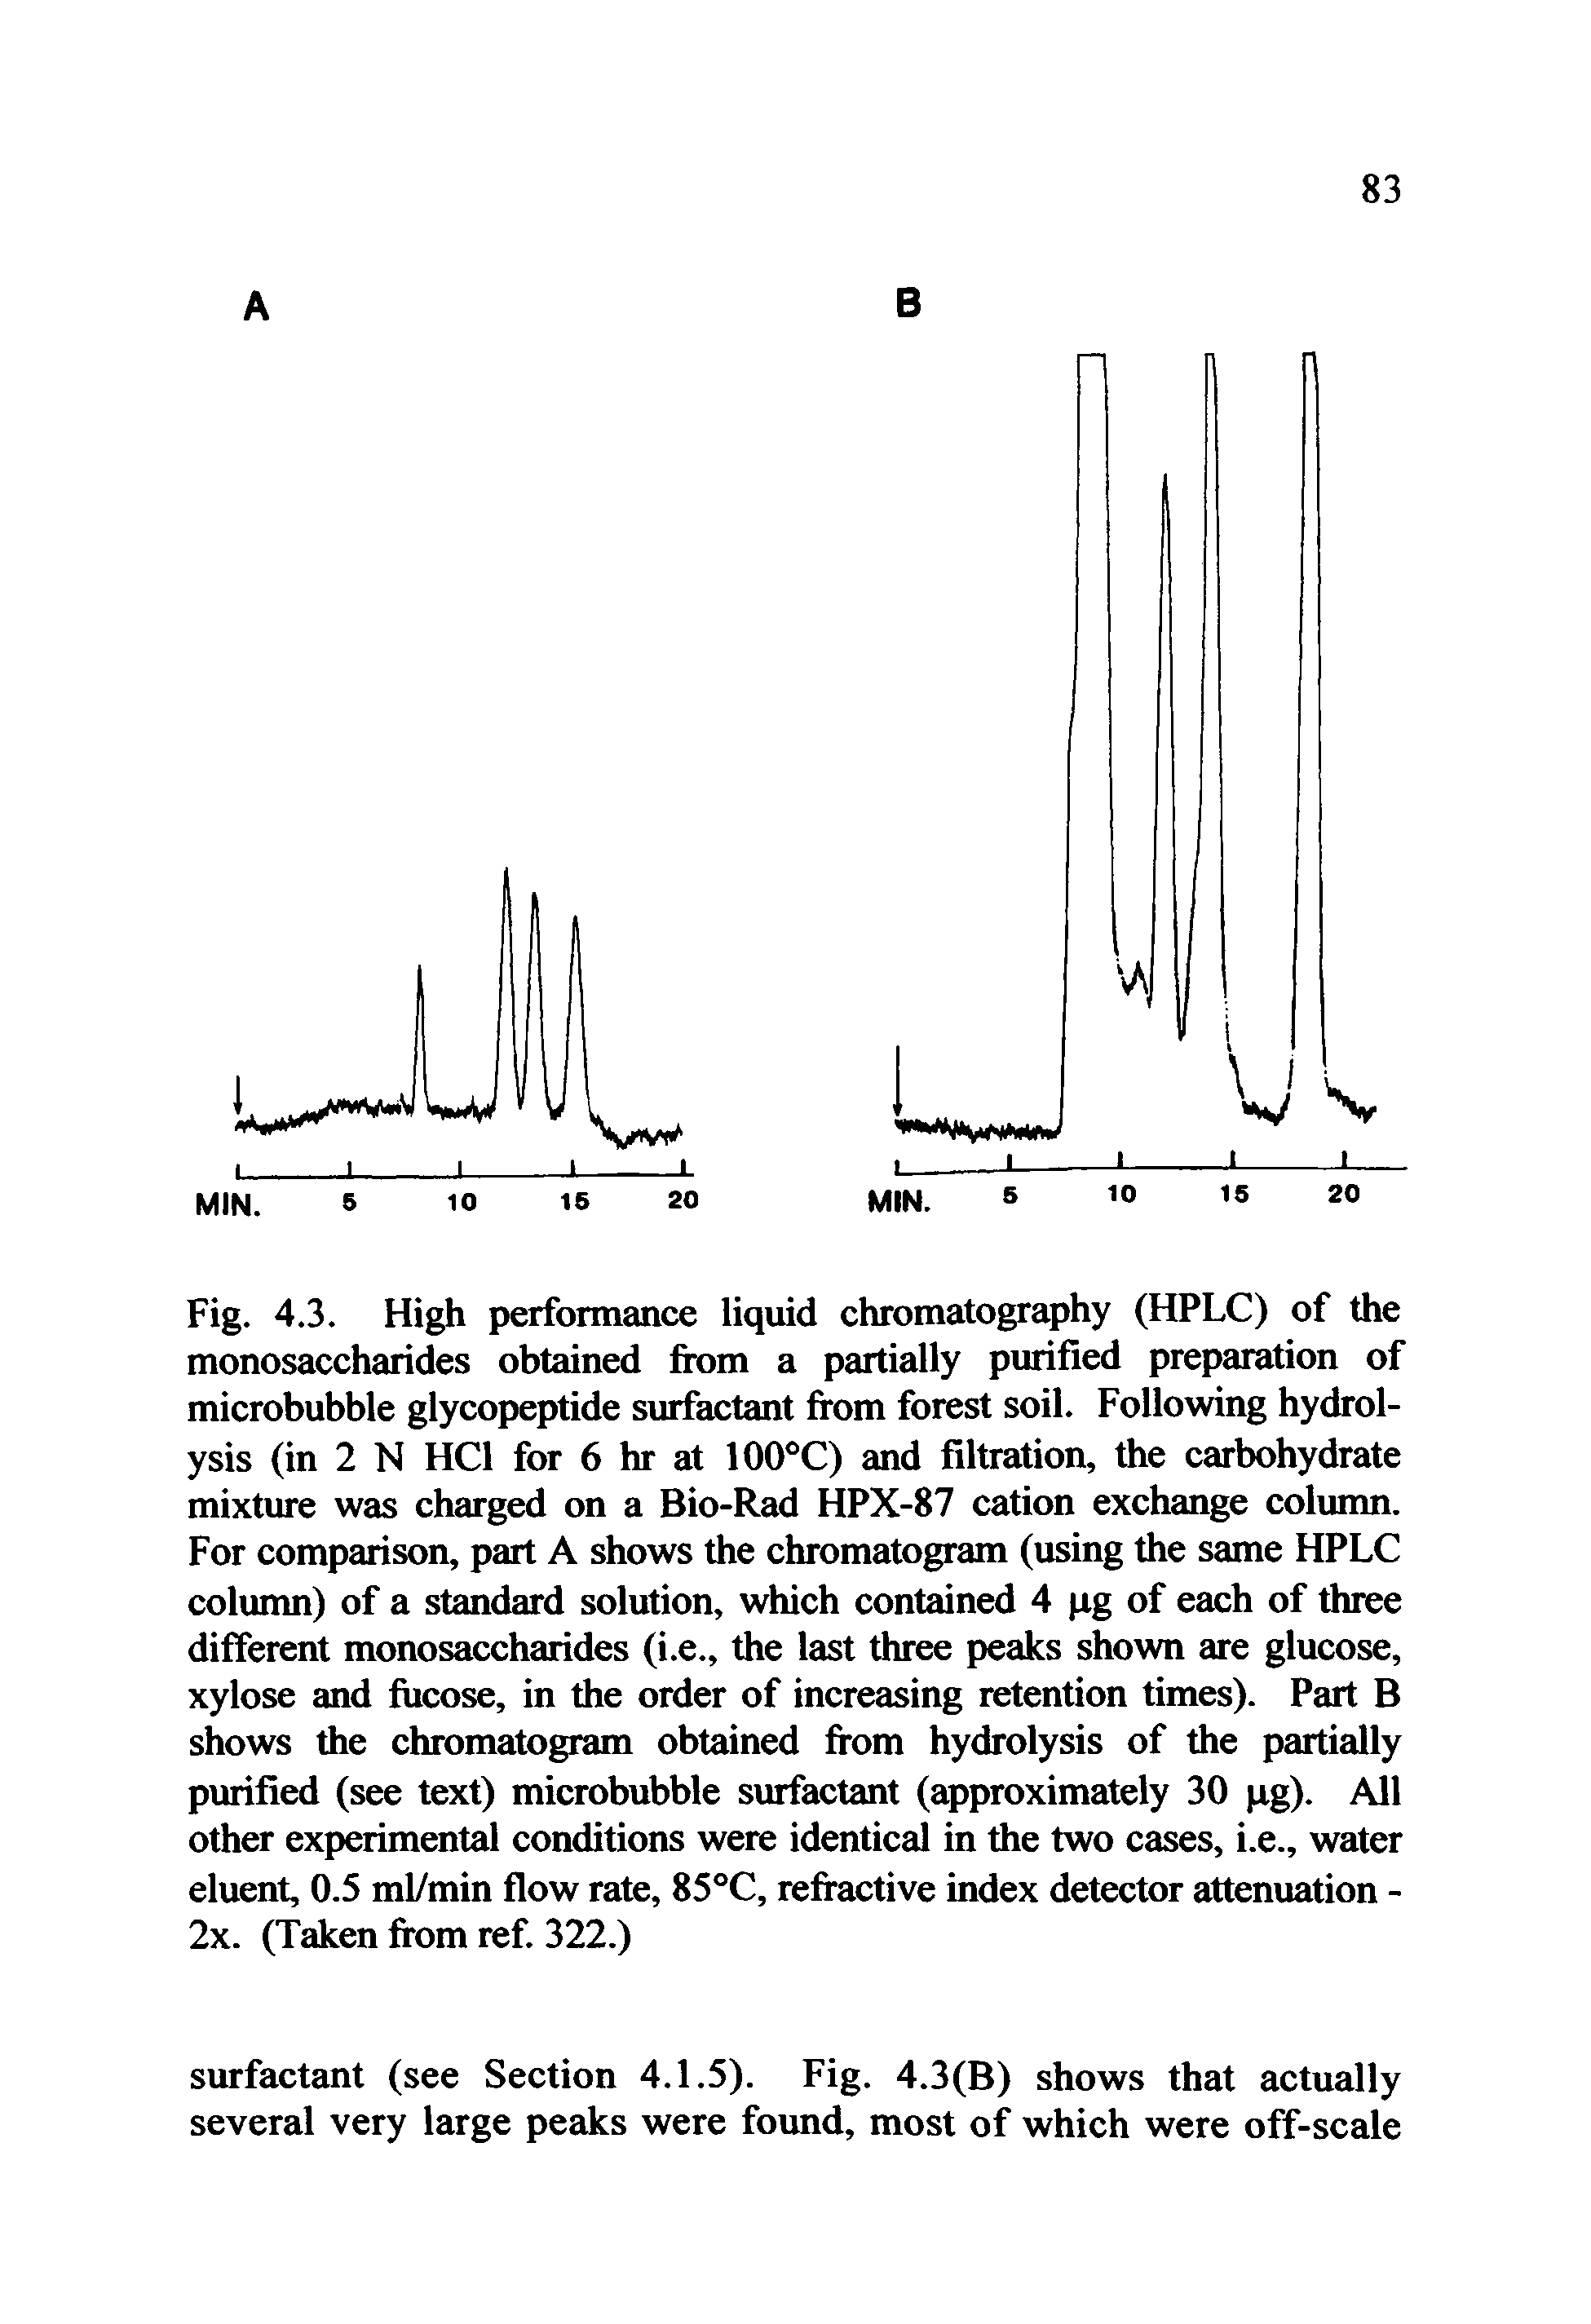 Fig. 4.3. High performance liquid chromatography (HPLC) of the monosaccharides obtained from a partially purified preparation of microbubble glycopeptide surfactant from forest soil. Following hydrolysis (in 2 N HC1 for 6 hr at 100°C) and filtration, the carbohydrate mixture was charged on a Bio-Rad HPX-87 cation exchange column. For comparison, part A shows the chromatogram (using the same HPLC column) of a standard solution, which contained 4 pg of each of three different monosaccharides (i.e., the last three peaks shown are glucose, xylose and fiicose, in the order of increasing retention times). Part B shows the chromatogram obtained from hydrolysis of the partially purified (see text) microbubble surfactant (approximately 30 pg). All other experimental conditions were identical in the two cases, i.e., water eluent, 0.5 ml/min flow rate, 85°C, refractive index detector attenuation -2x. (Taken from ref. 322.)...